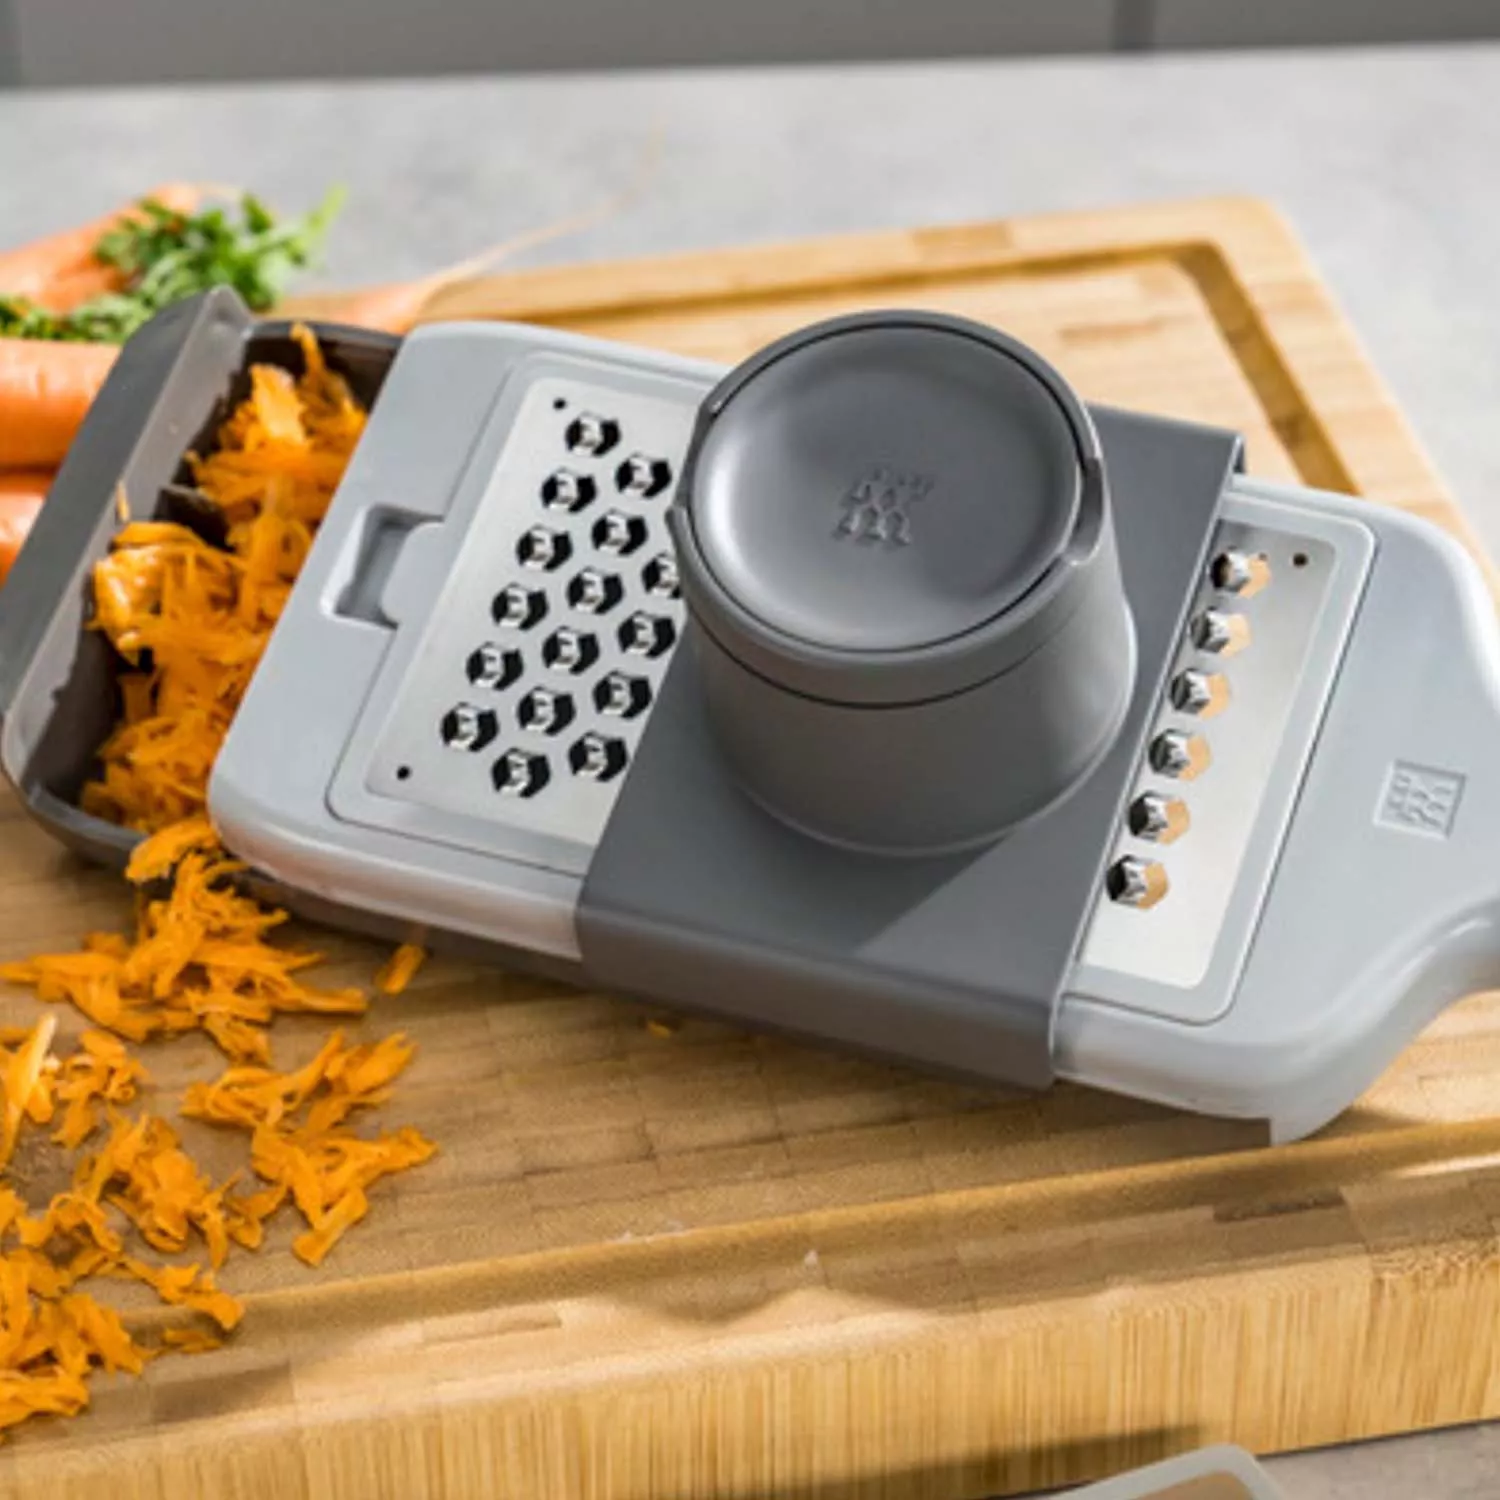 Large Cut Grater with Nonslip Grip - Elements Collection 